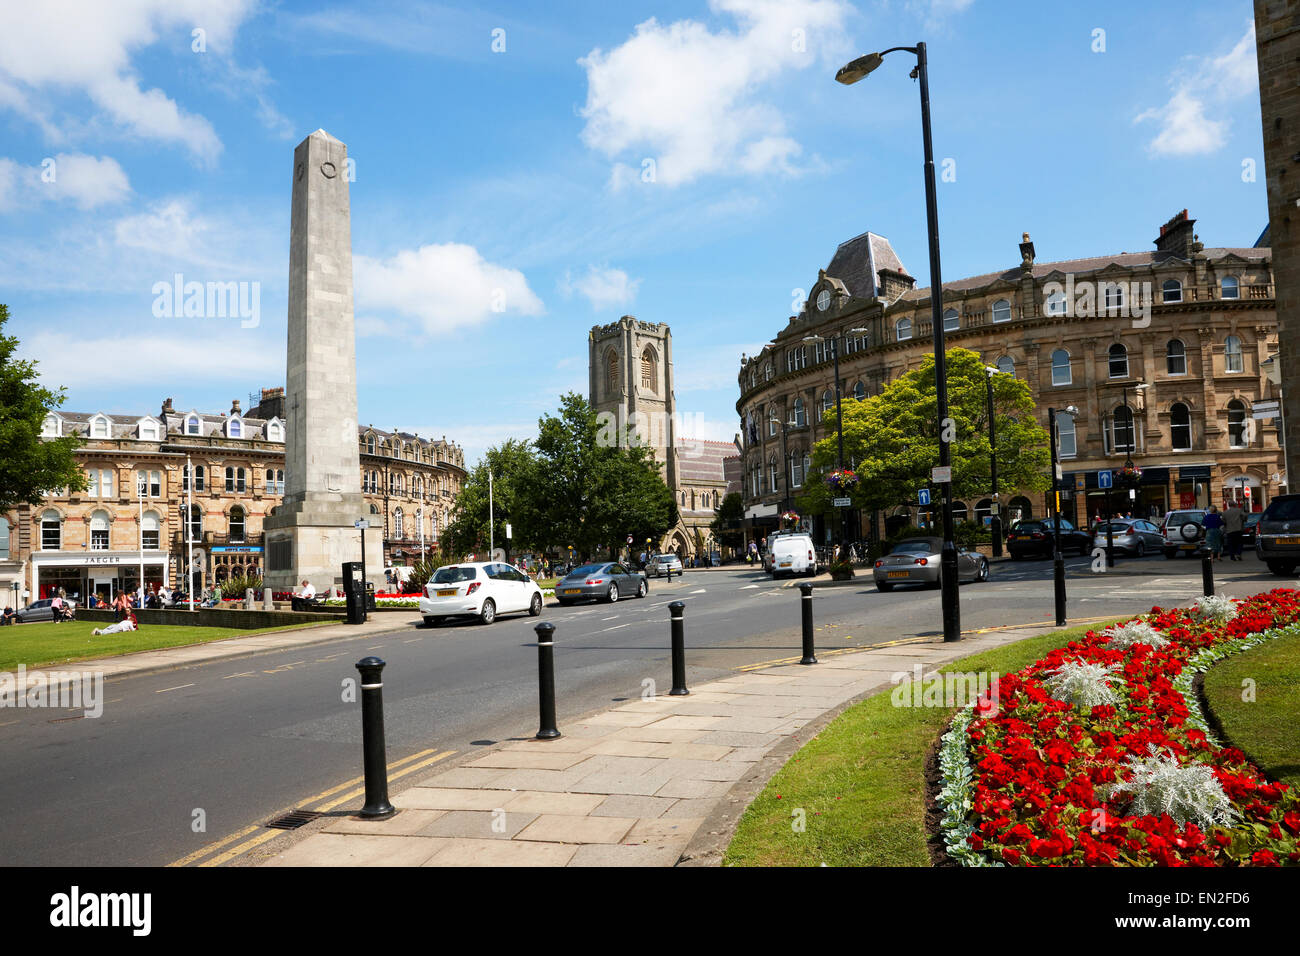 Harrogate town centre, looking towards the cenotaph. North Yorkshire UK Stock Photo